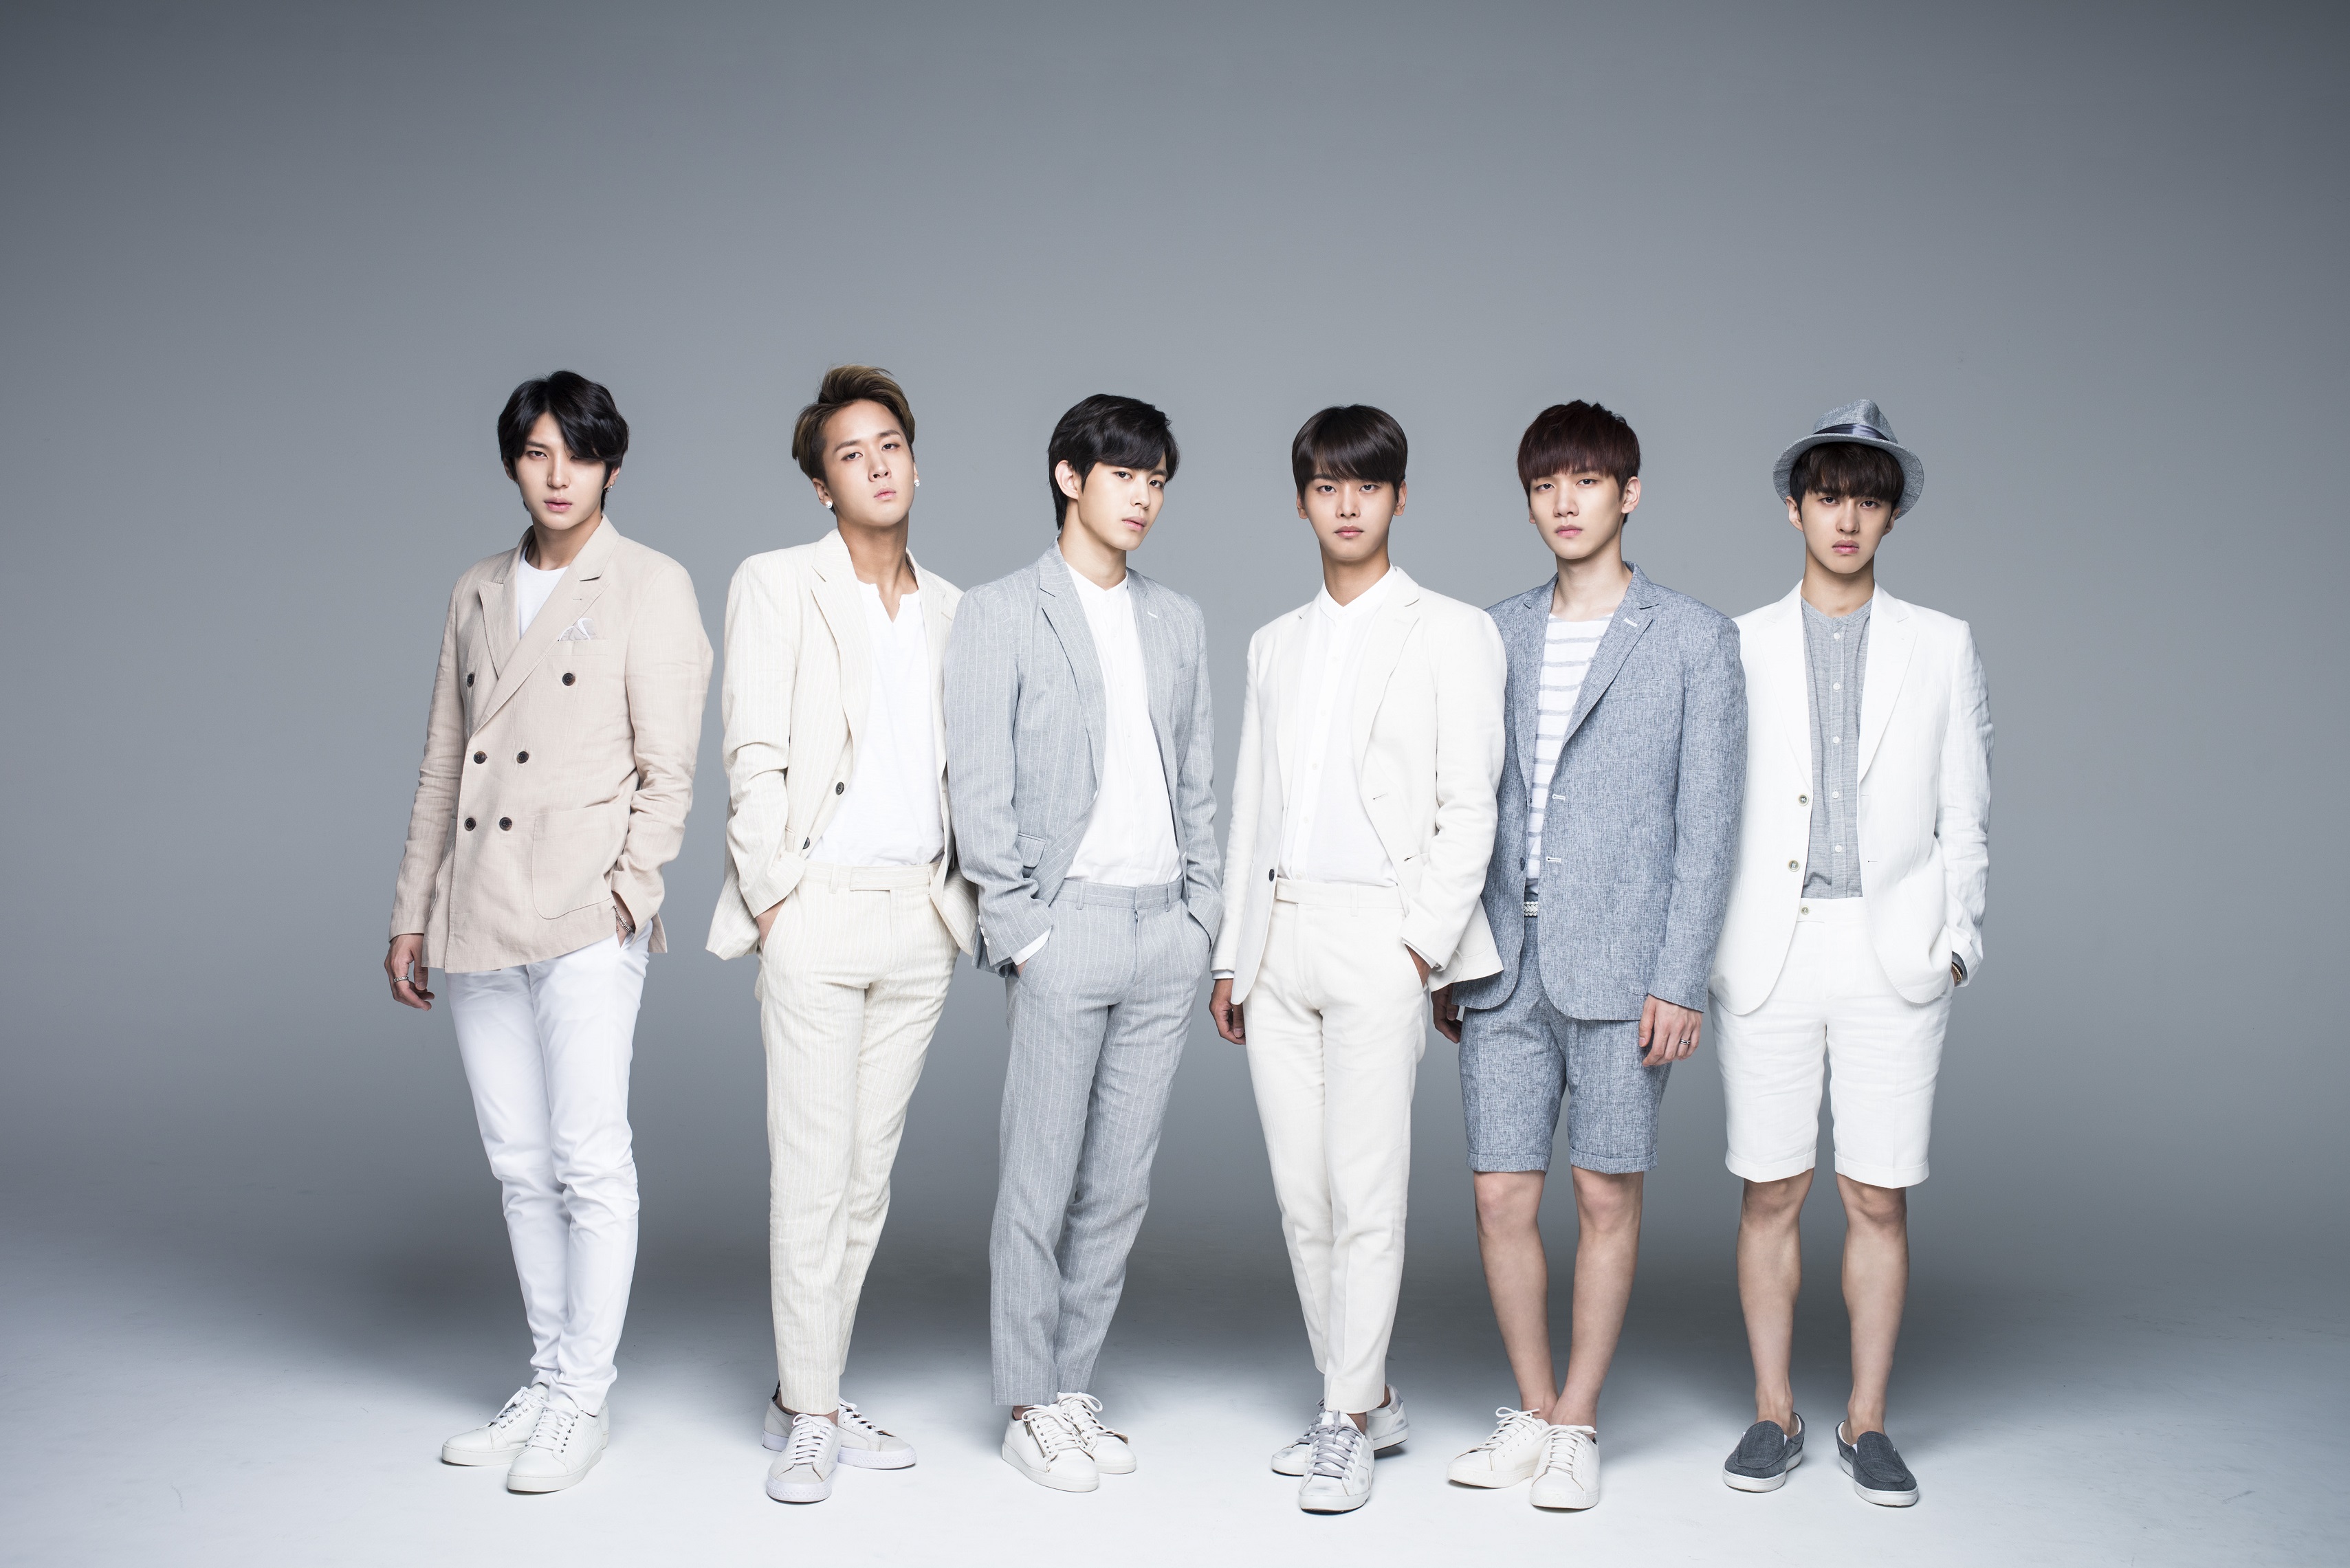 【VIXX】Photo_Official Interview_Can't say